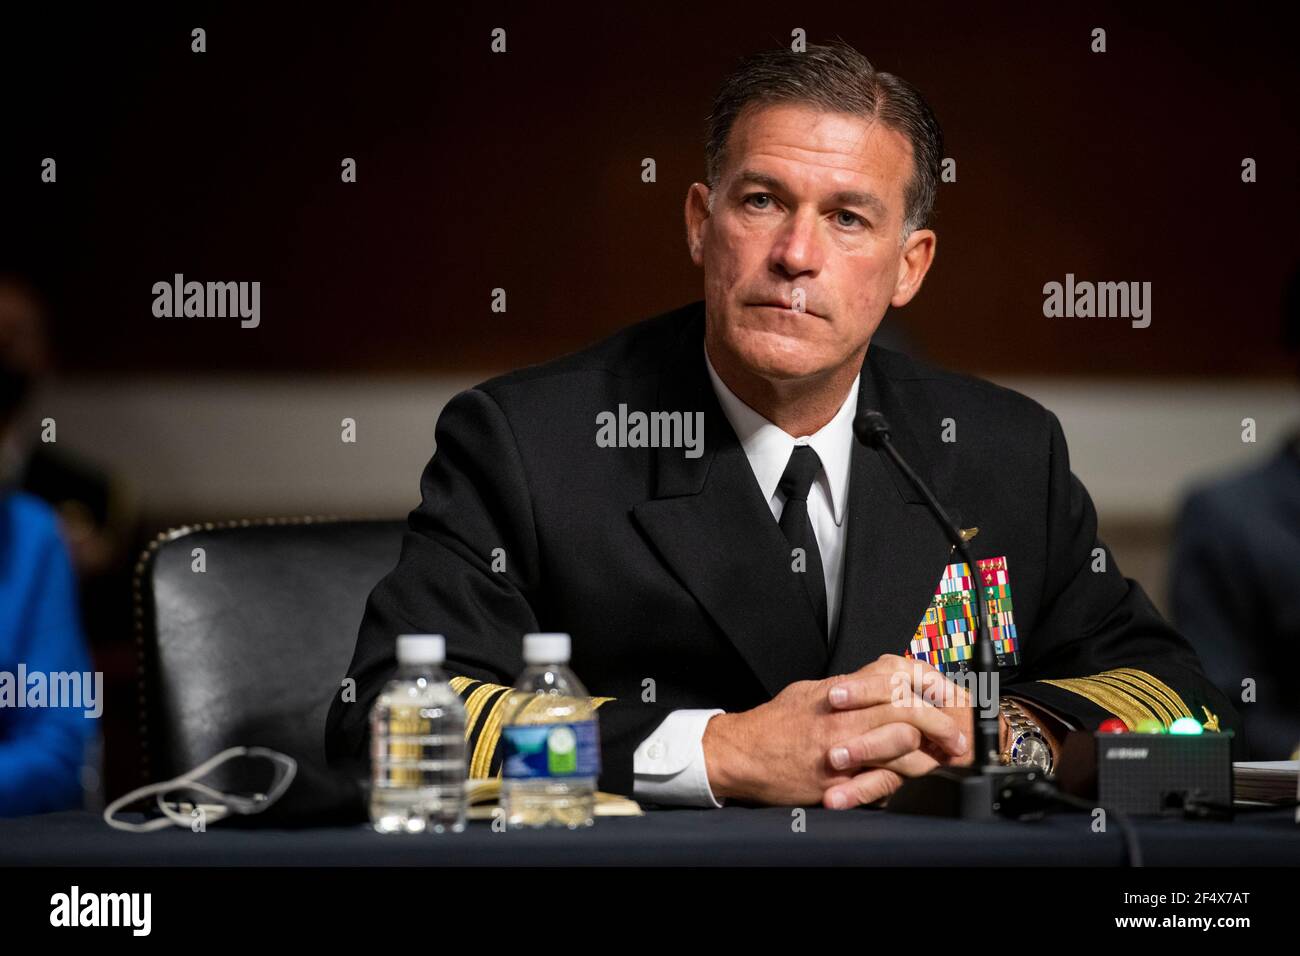 Admiral John C. Aquilino, USN, appears at a Senate Committee on Armed Services hearing regarding his nomination for reappointment to the grade of admiral and to be Commander, United States Indo-Pacific Command, Department of Defense, in the Dirksen Senate Office Building in Washington, DC, Tuesday, March 23, 2021. Credit: Rod Lamkey/CNP /MediaPunch Stock Photo